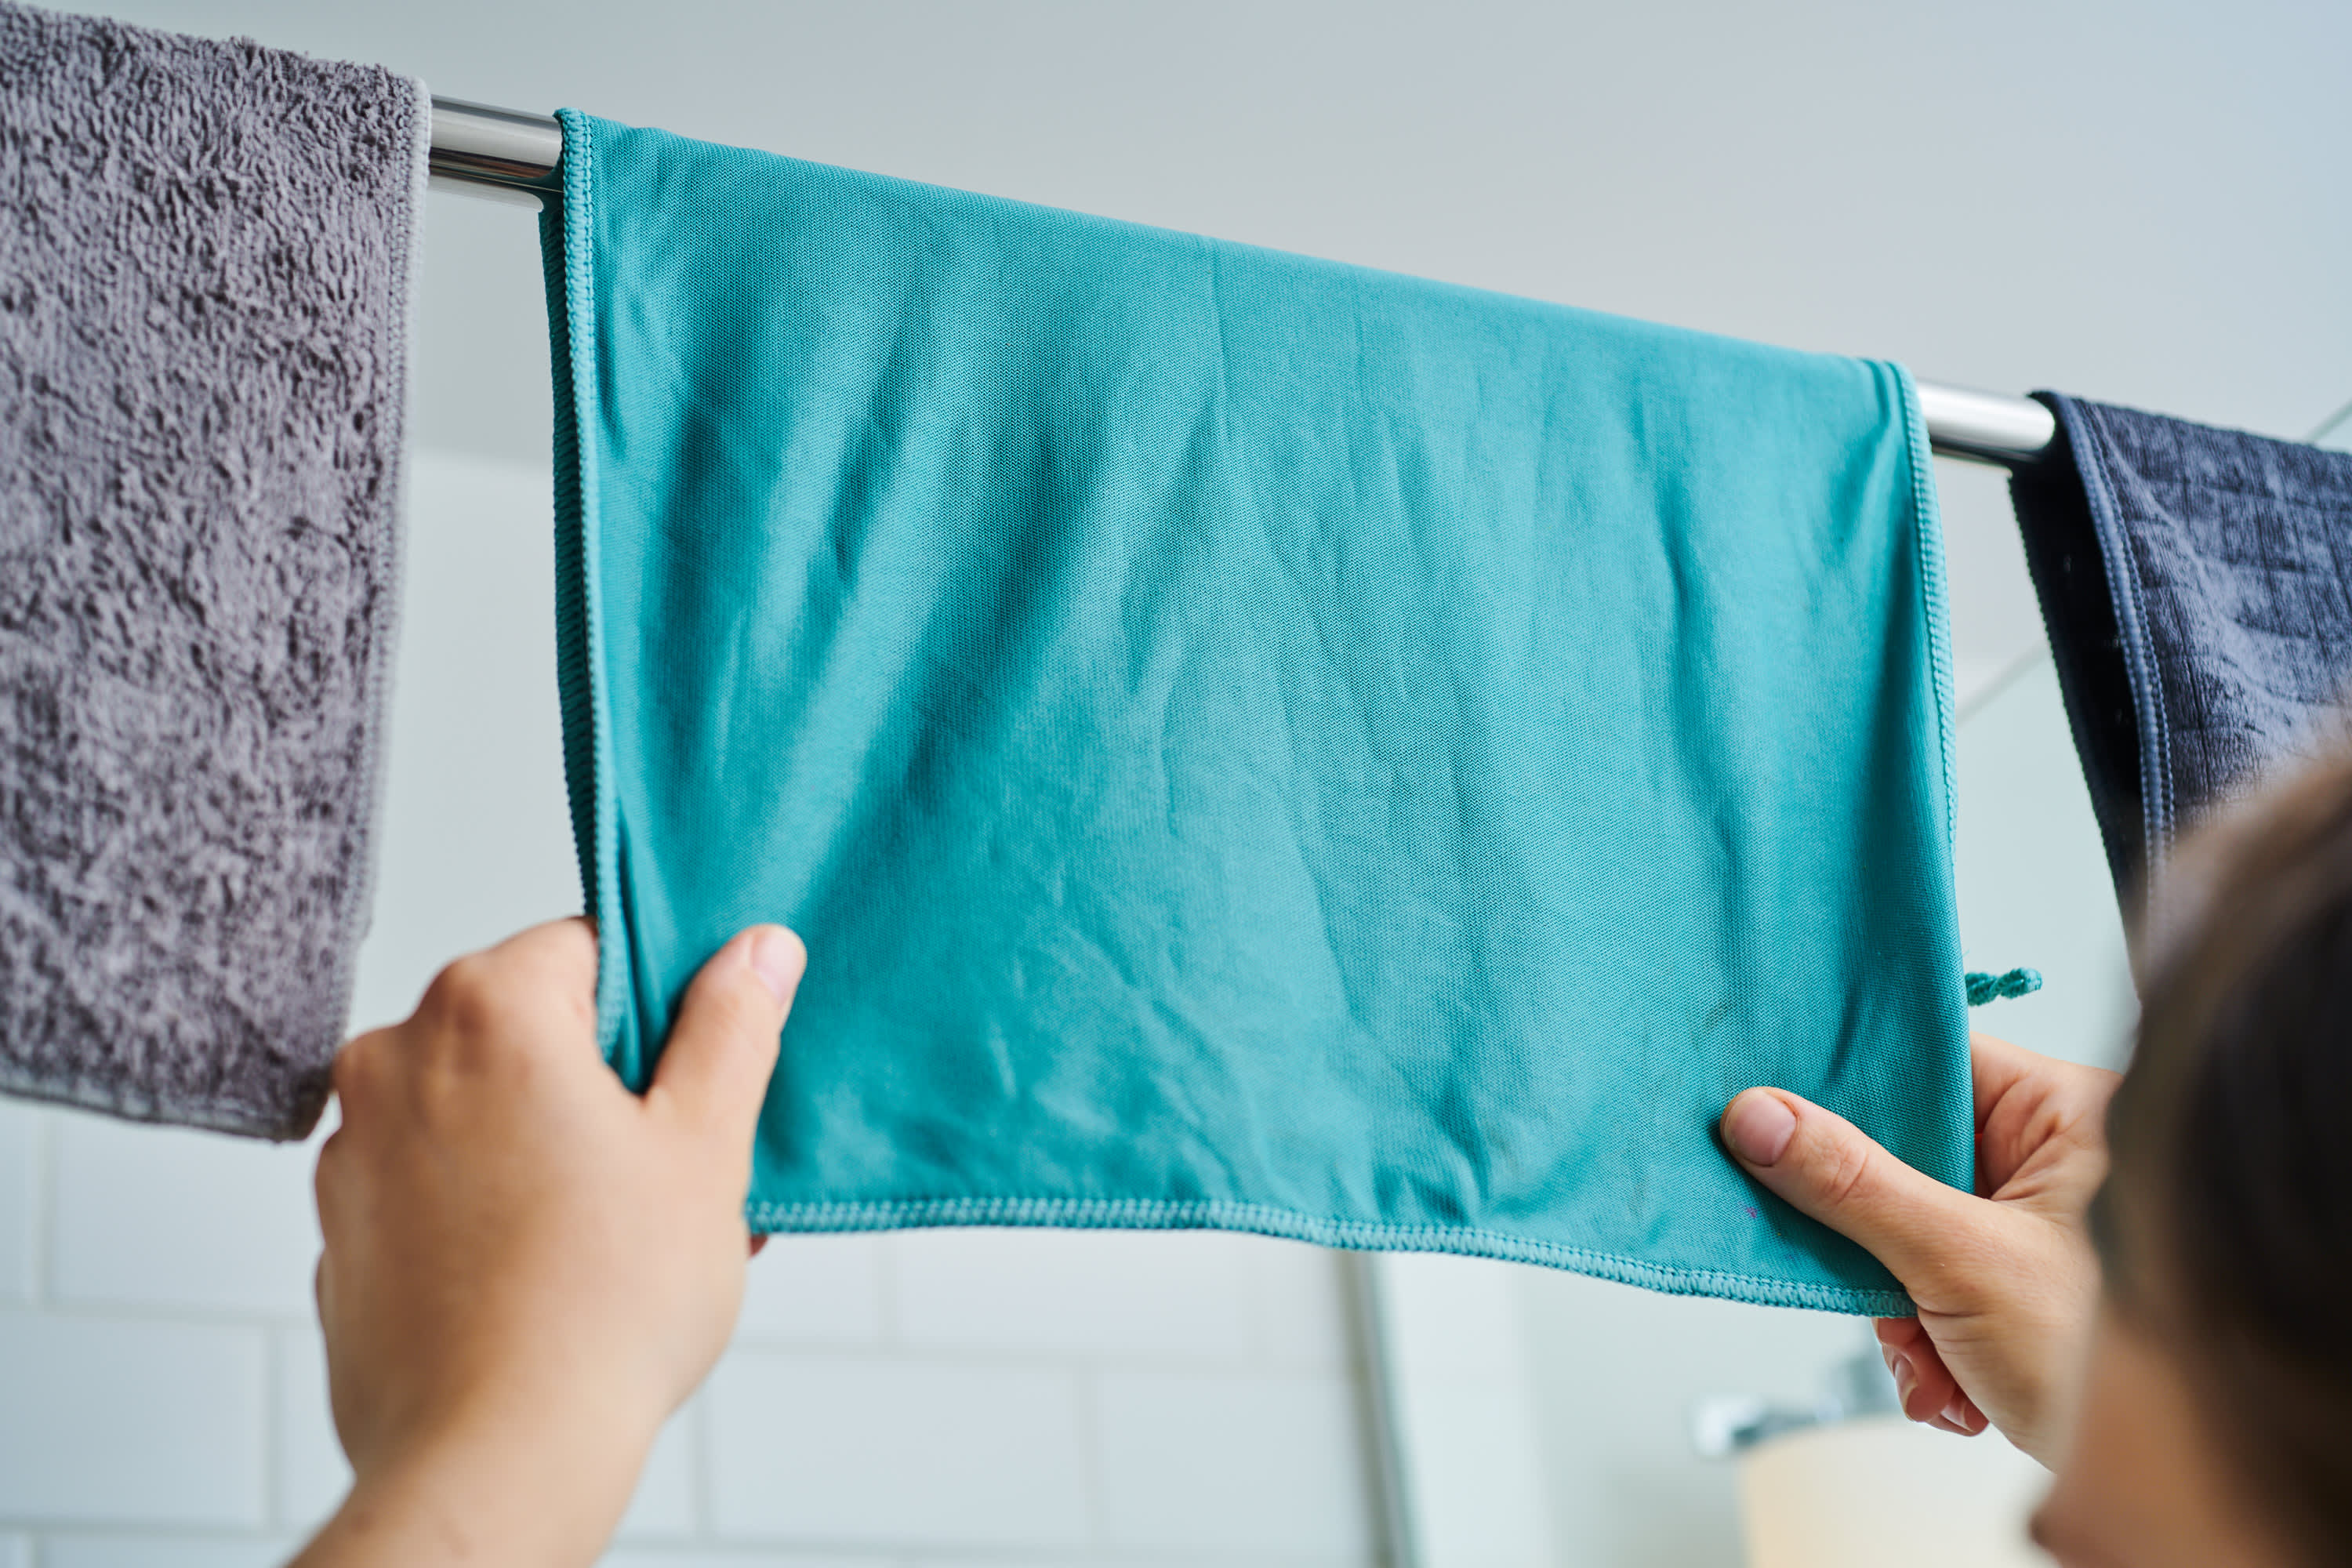 How Microfiber Cloths Can Stop The Spread Of The Coronavirus — Maid Share -  Shop Organic, All Natural and Non Toxic Cleaning Products